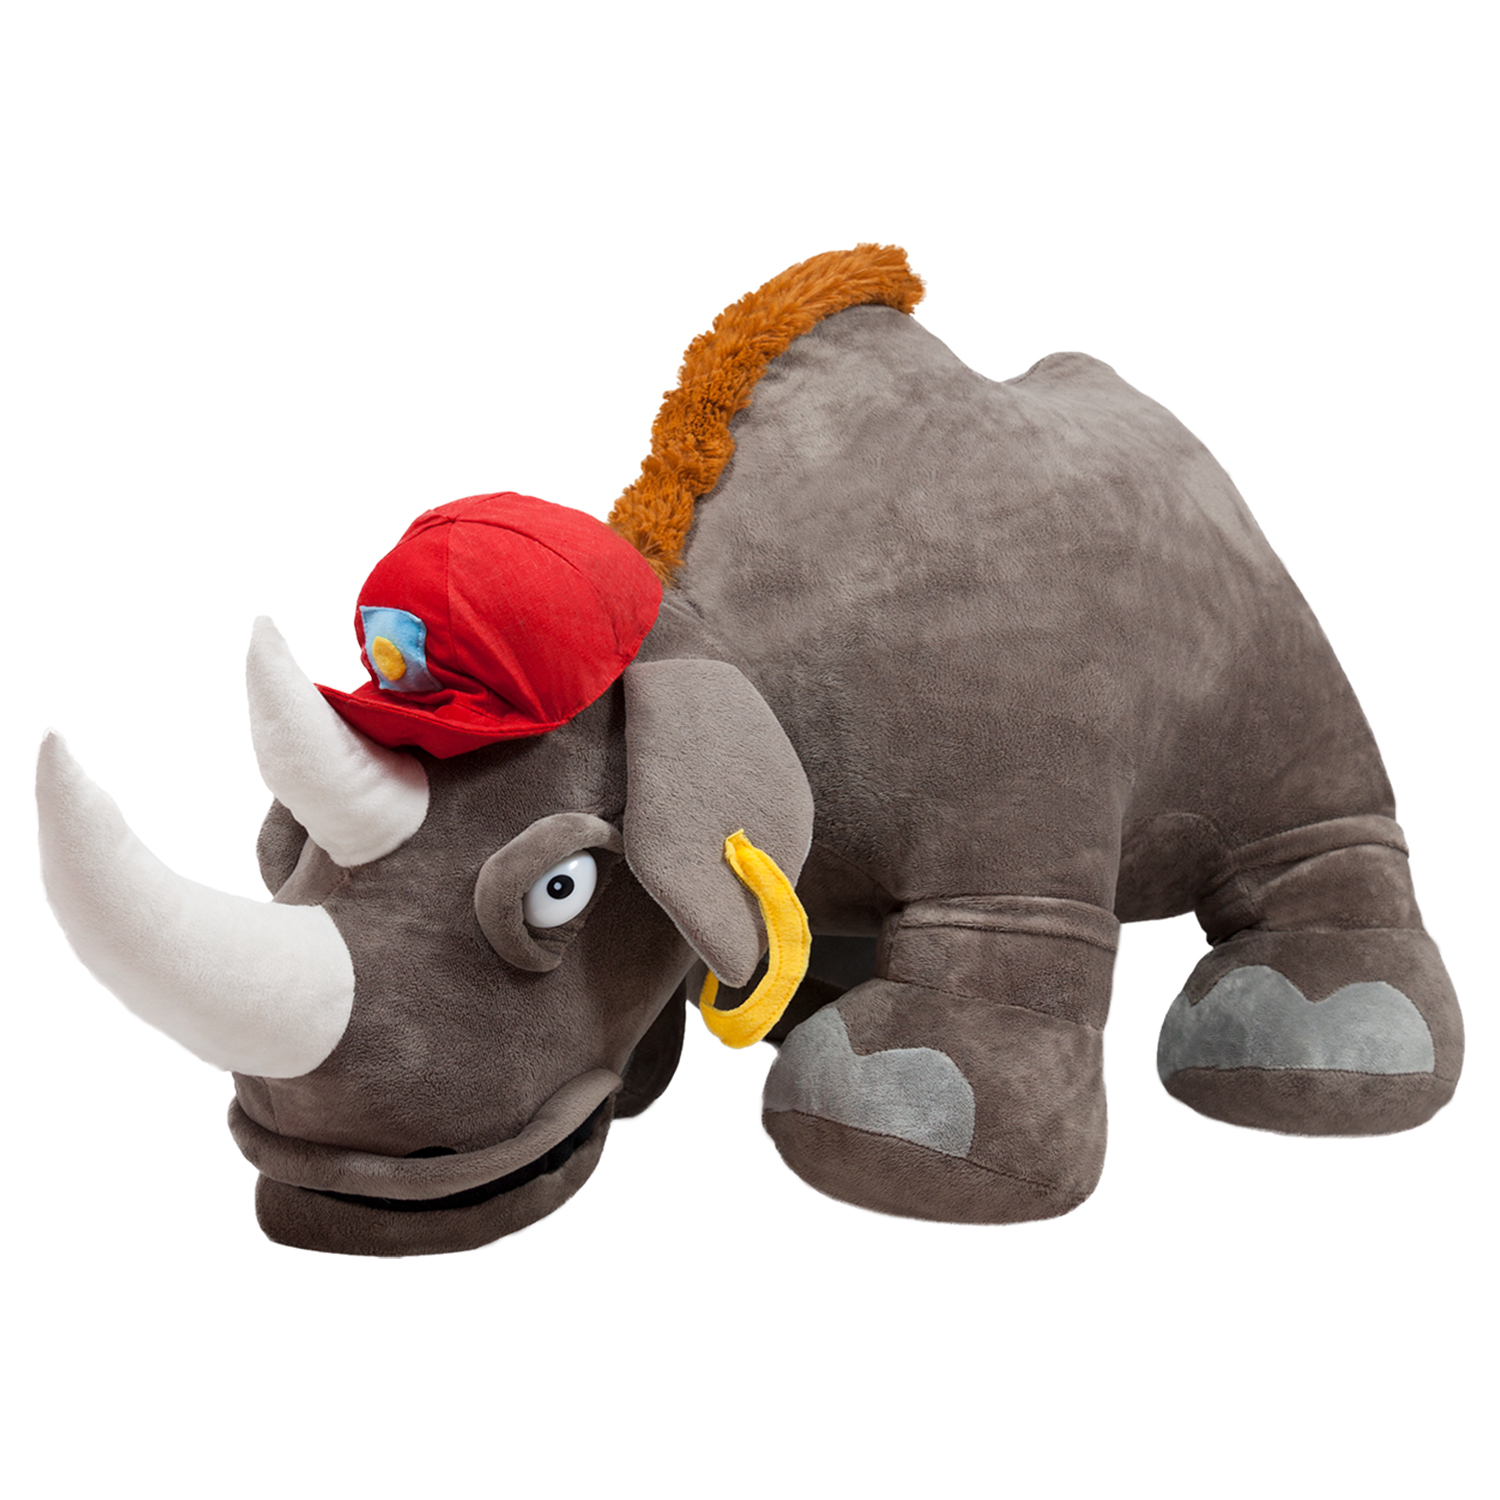 Rhino with hat